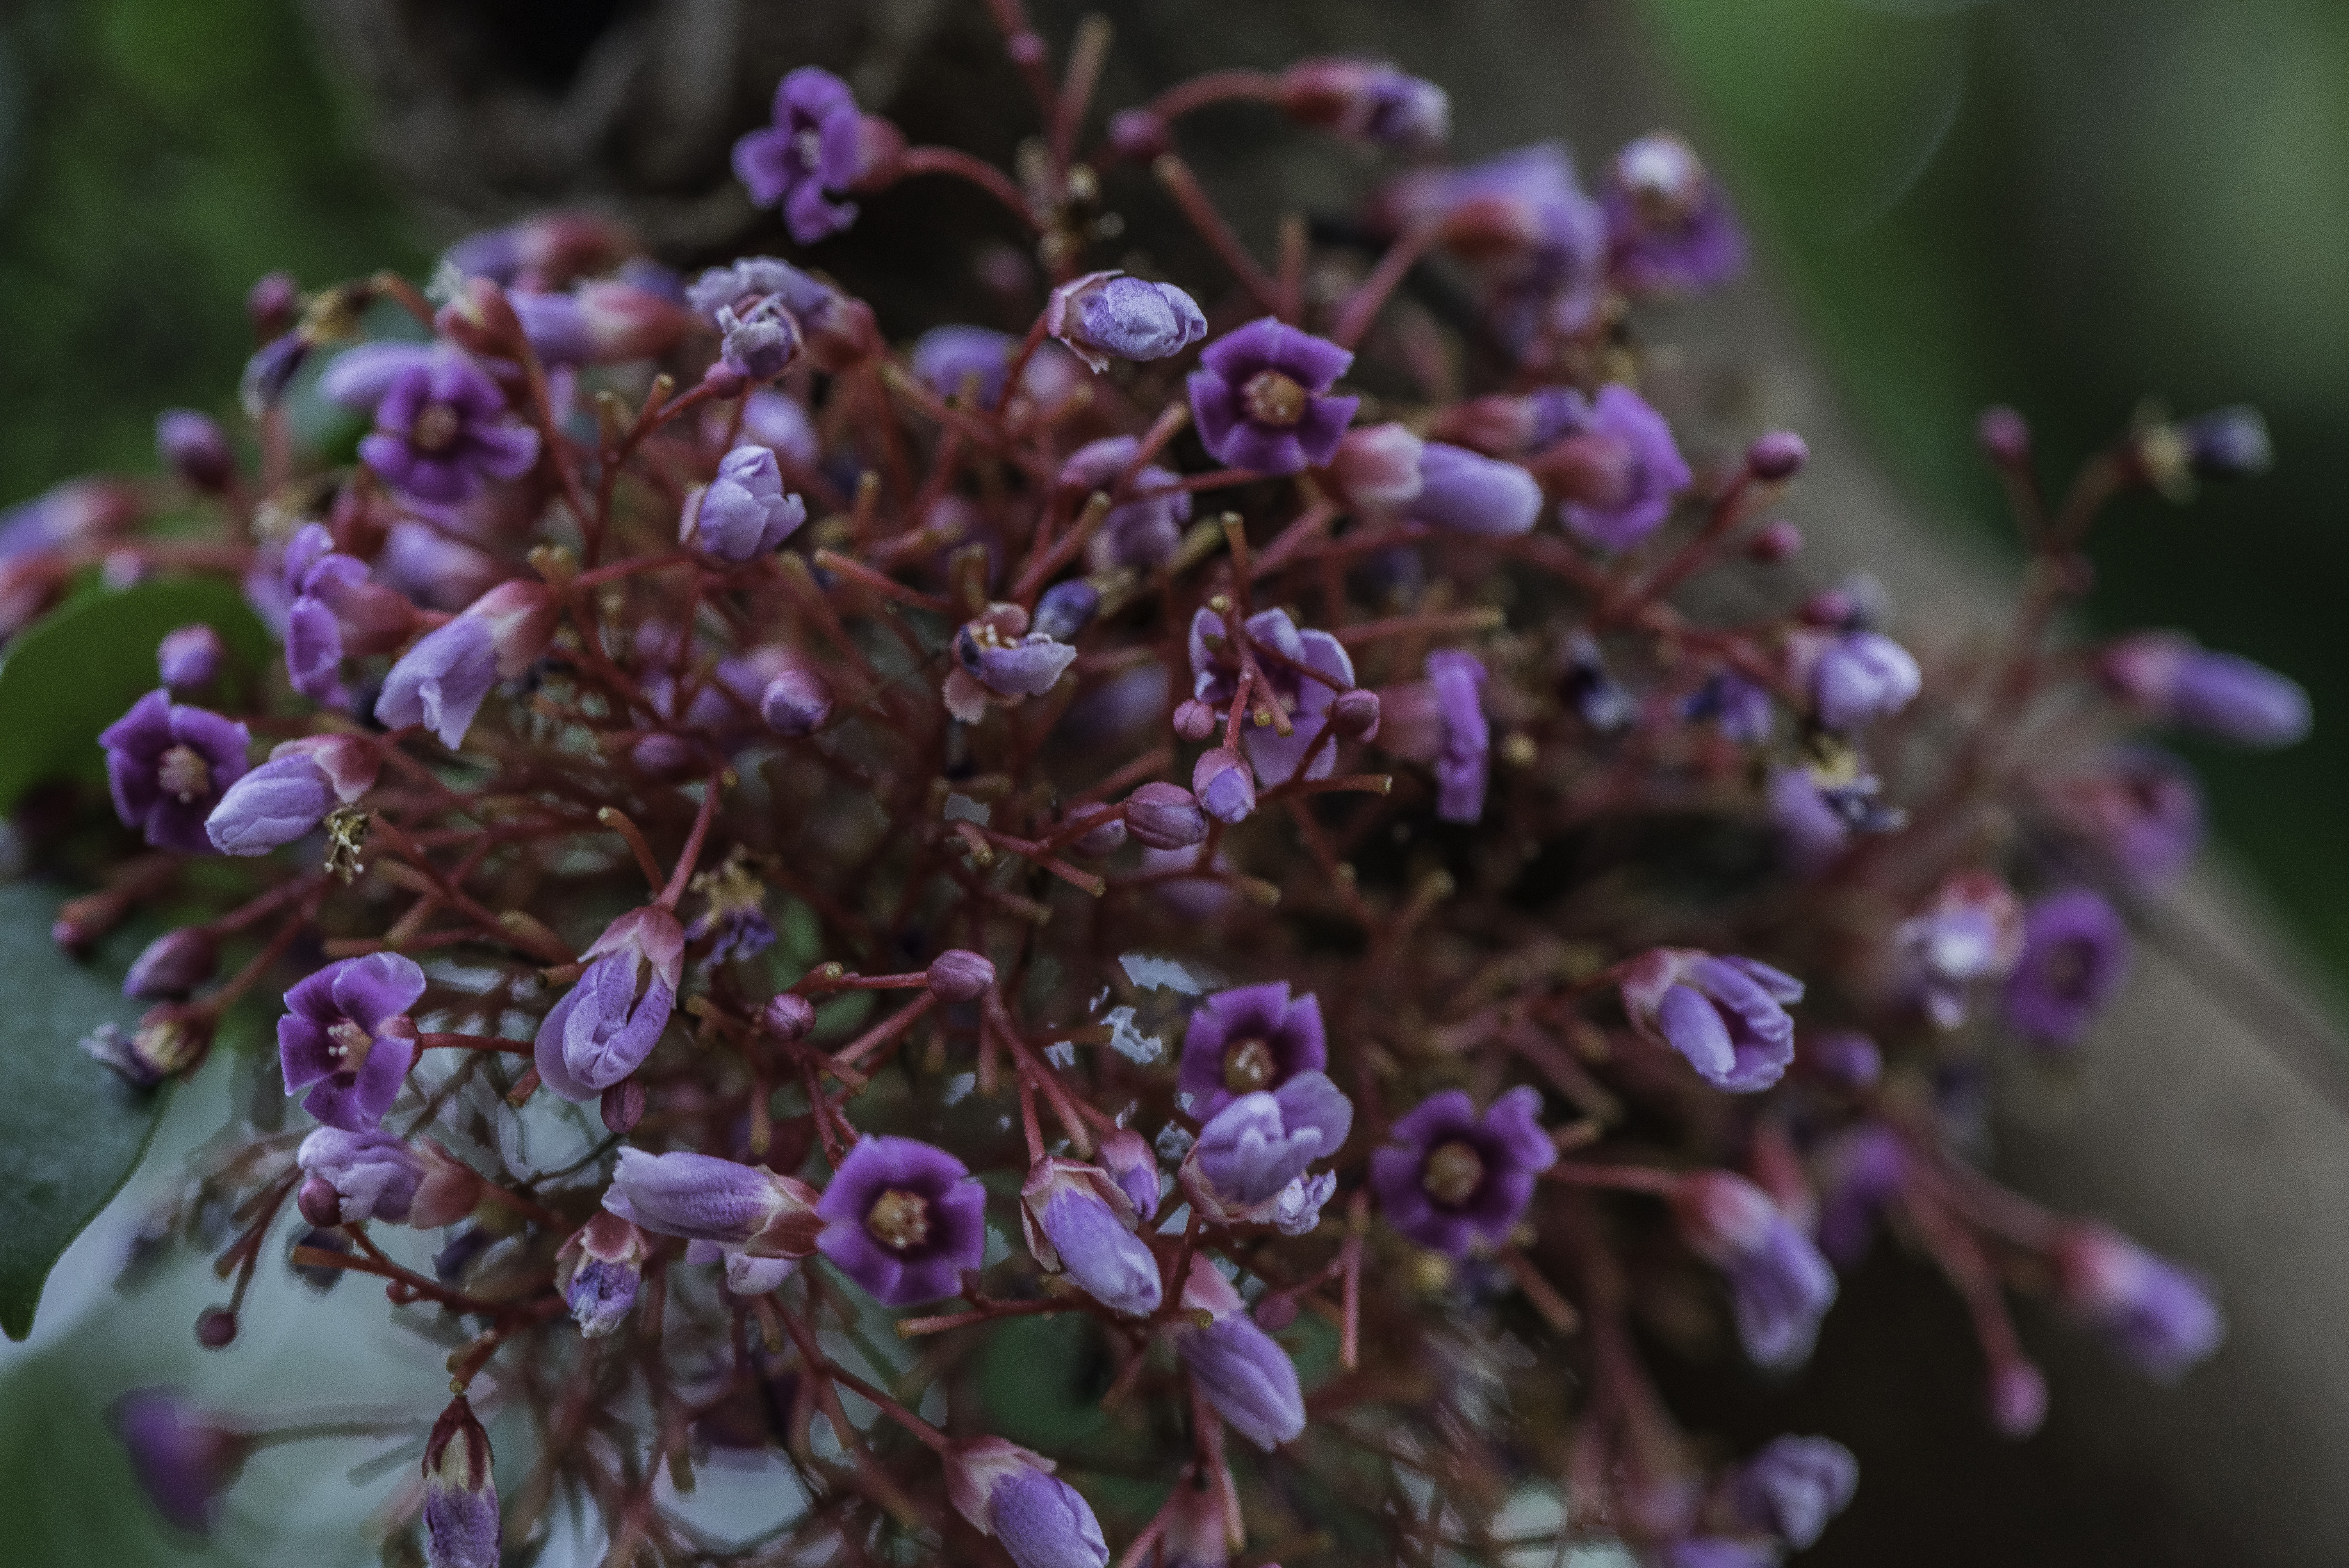 Purple flowers and buds image - Free stock photo - Public Domain photo ...